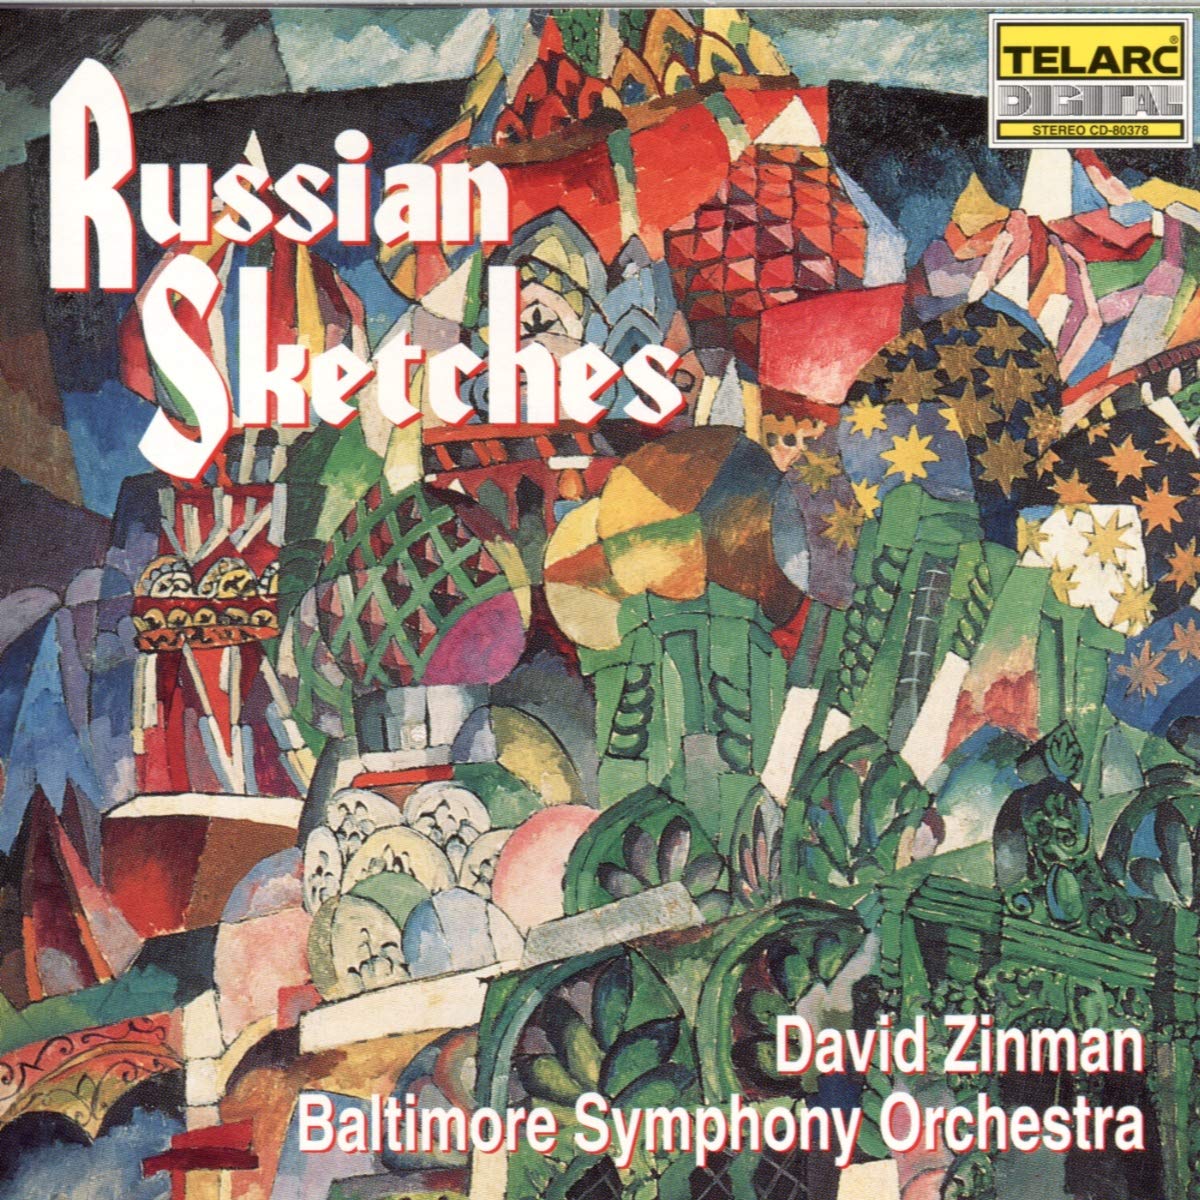 RUSSIAN SKETCHES - Zinman, Baltimore Symphony Orchestra